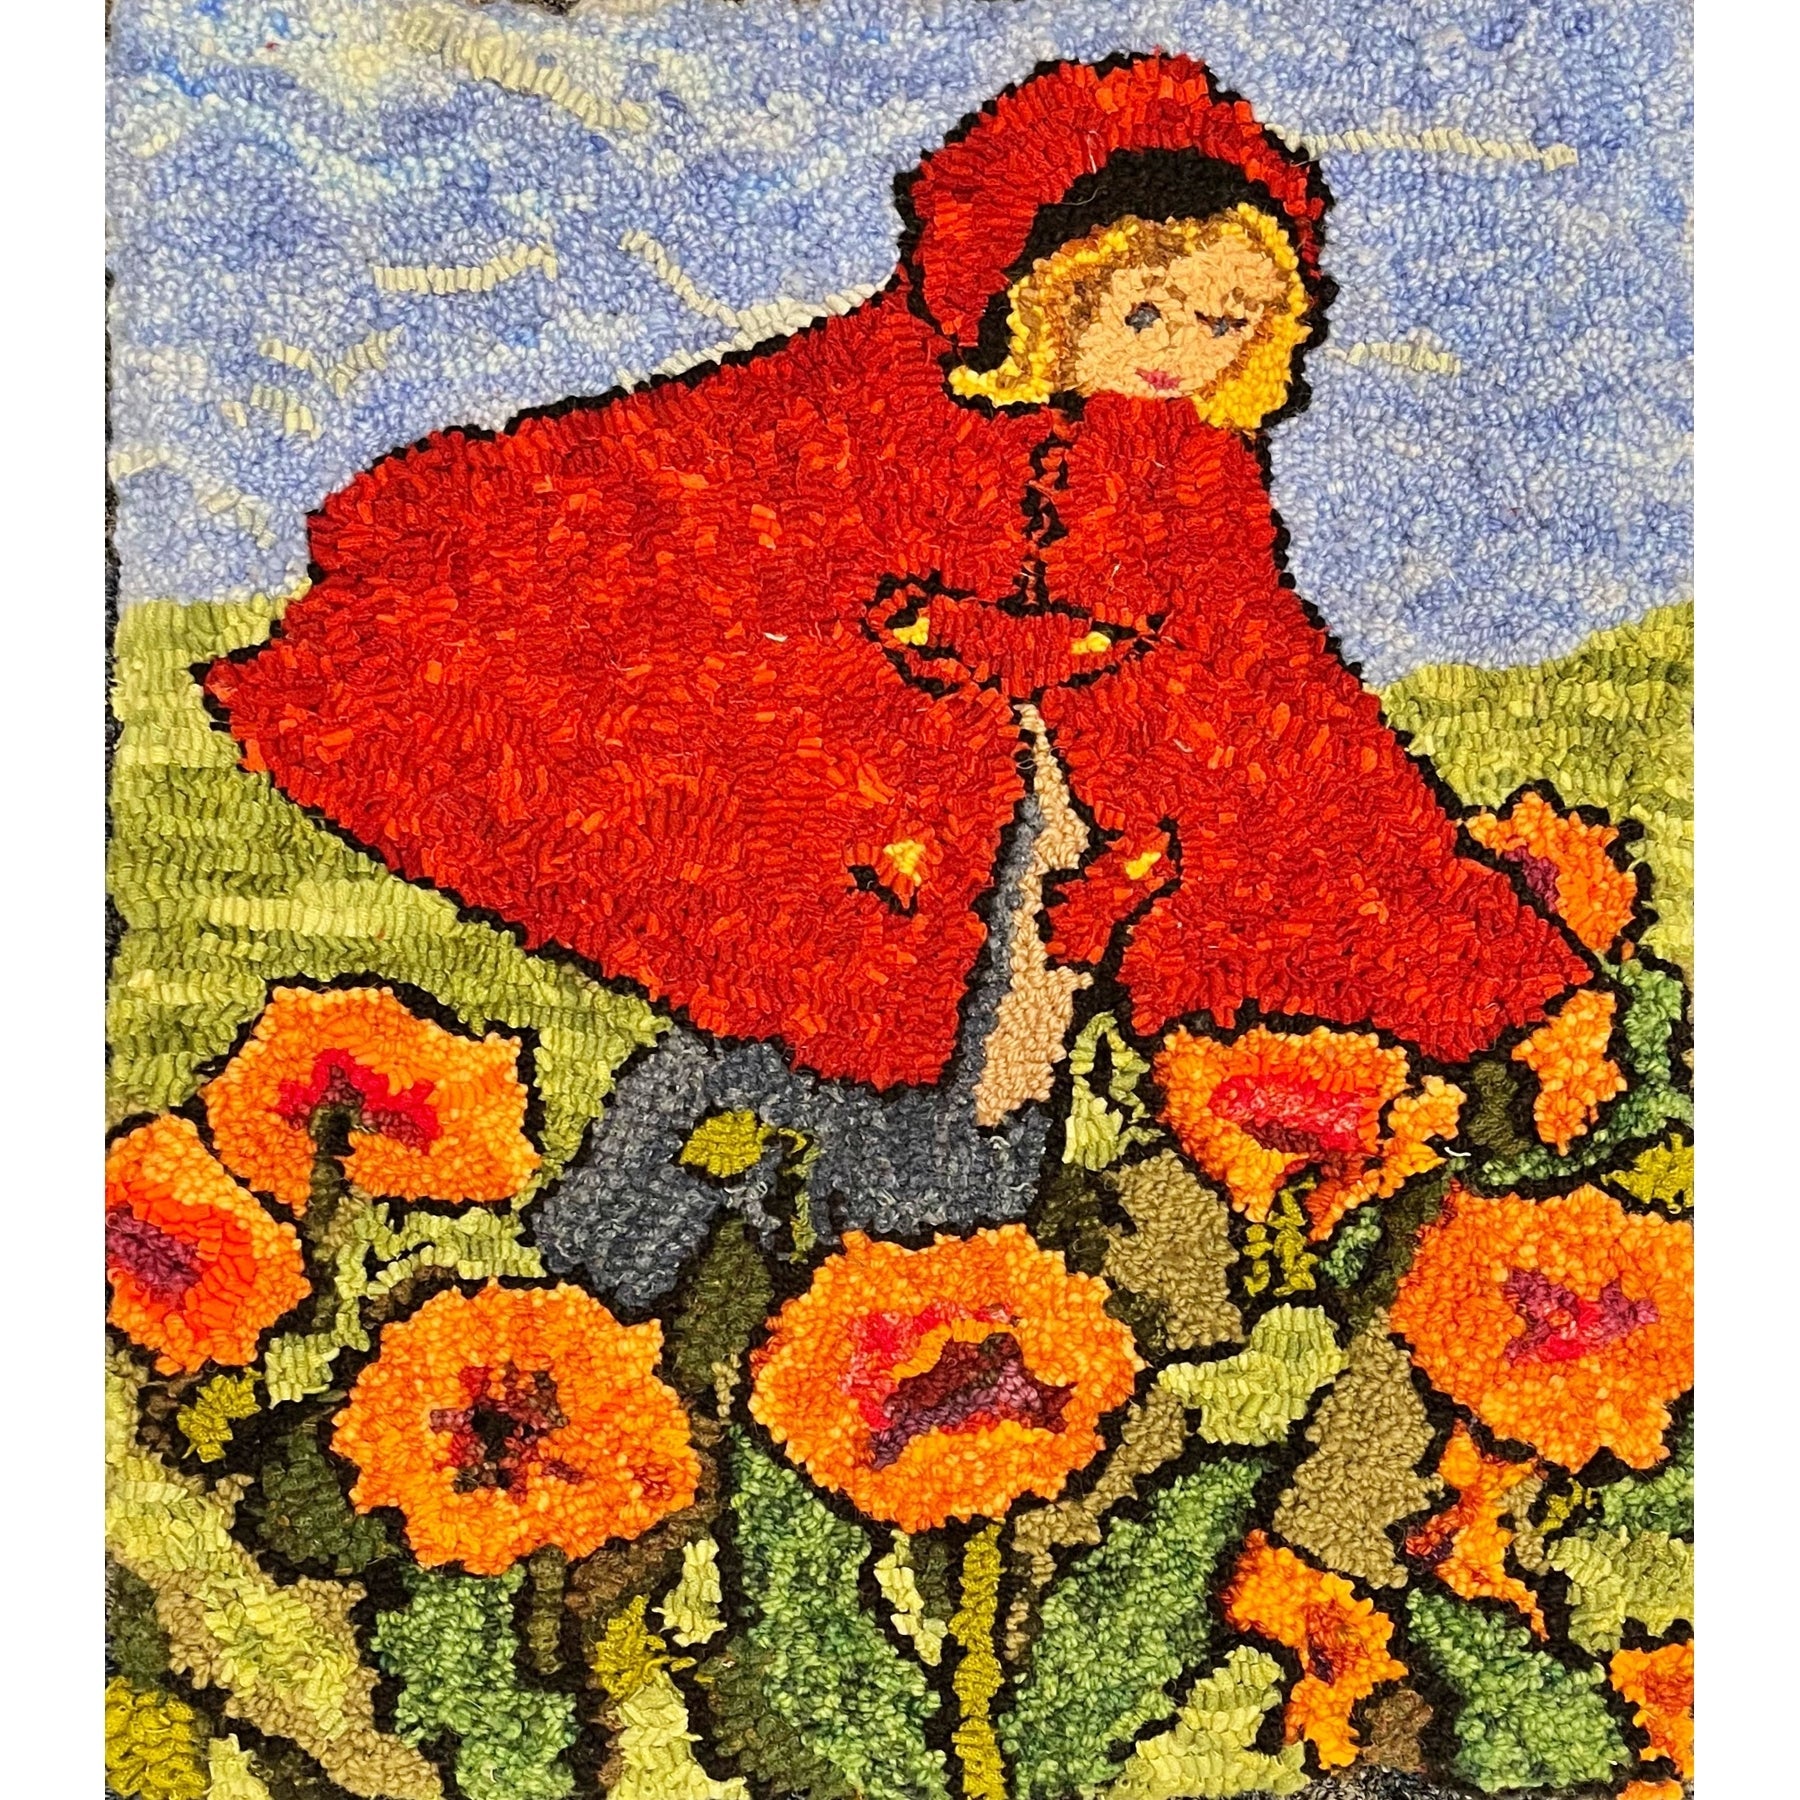 Red Riding Hood Poster, rug hooked by Sherrie Peterson